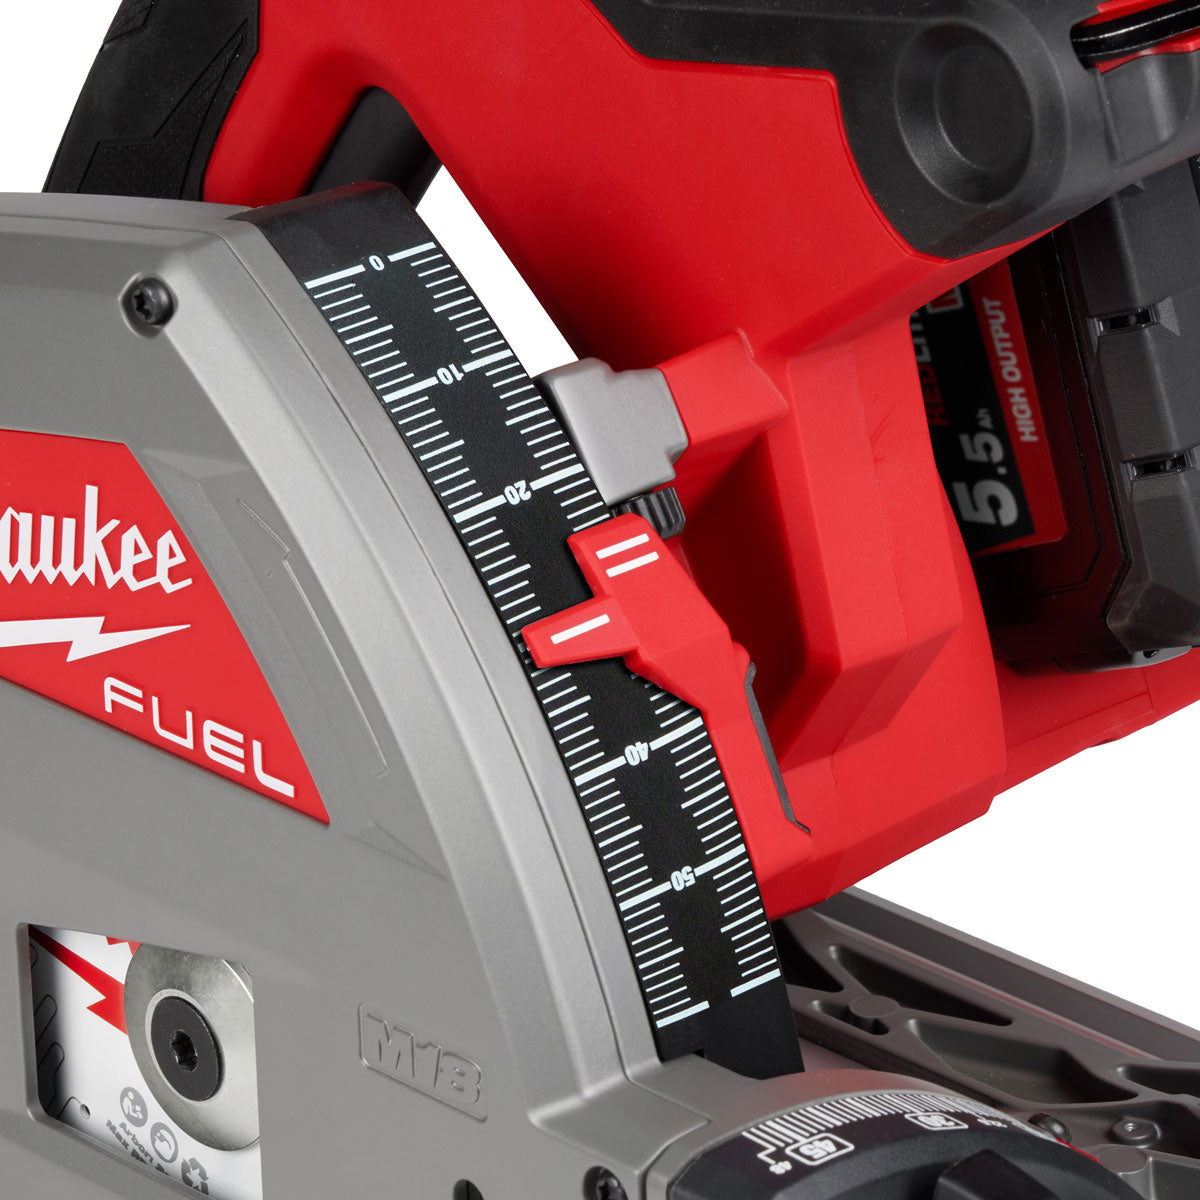 Milwaukee M18FPS55-0P 18V 165mm Fuel Brushless Plunge Saw with 2 x 5.0Ah Battery & Guide Rail Kit